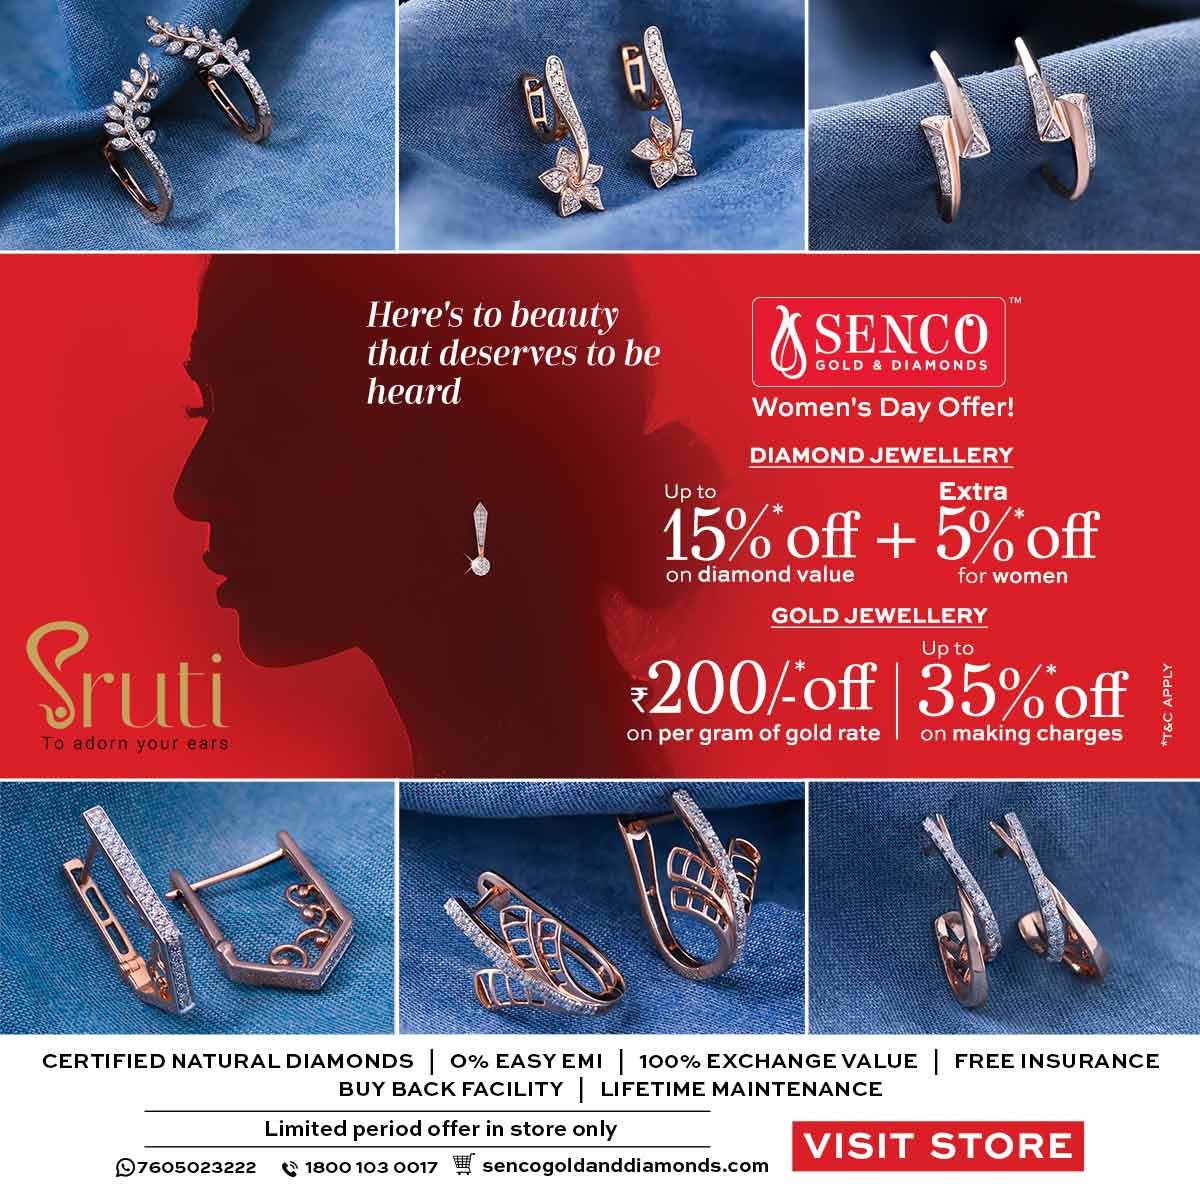 Elevate your style with stunning Diamond & Gold Jewellery at unbeatable prices! Limited time offer extended till March 25th. Shop now and shine brighter! Visit our stores today. #SencoOffers #Sruti #EmpoweredWomen #gold #diamonds #equality #SencoGoldAndDiamonds